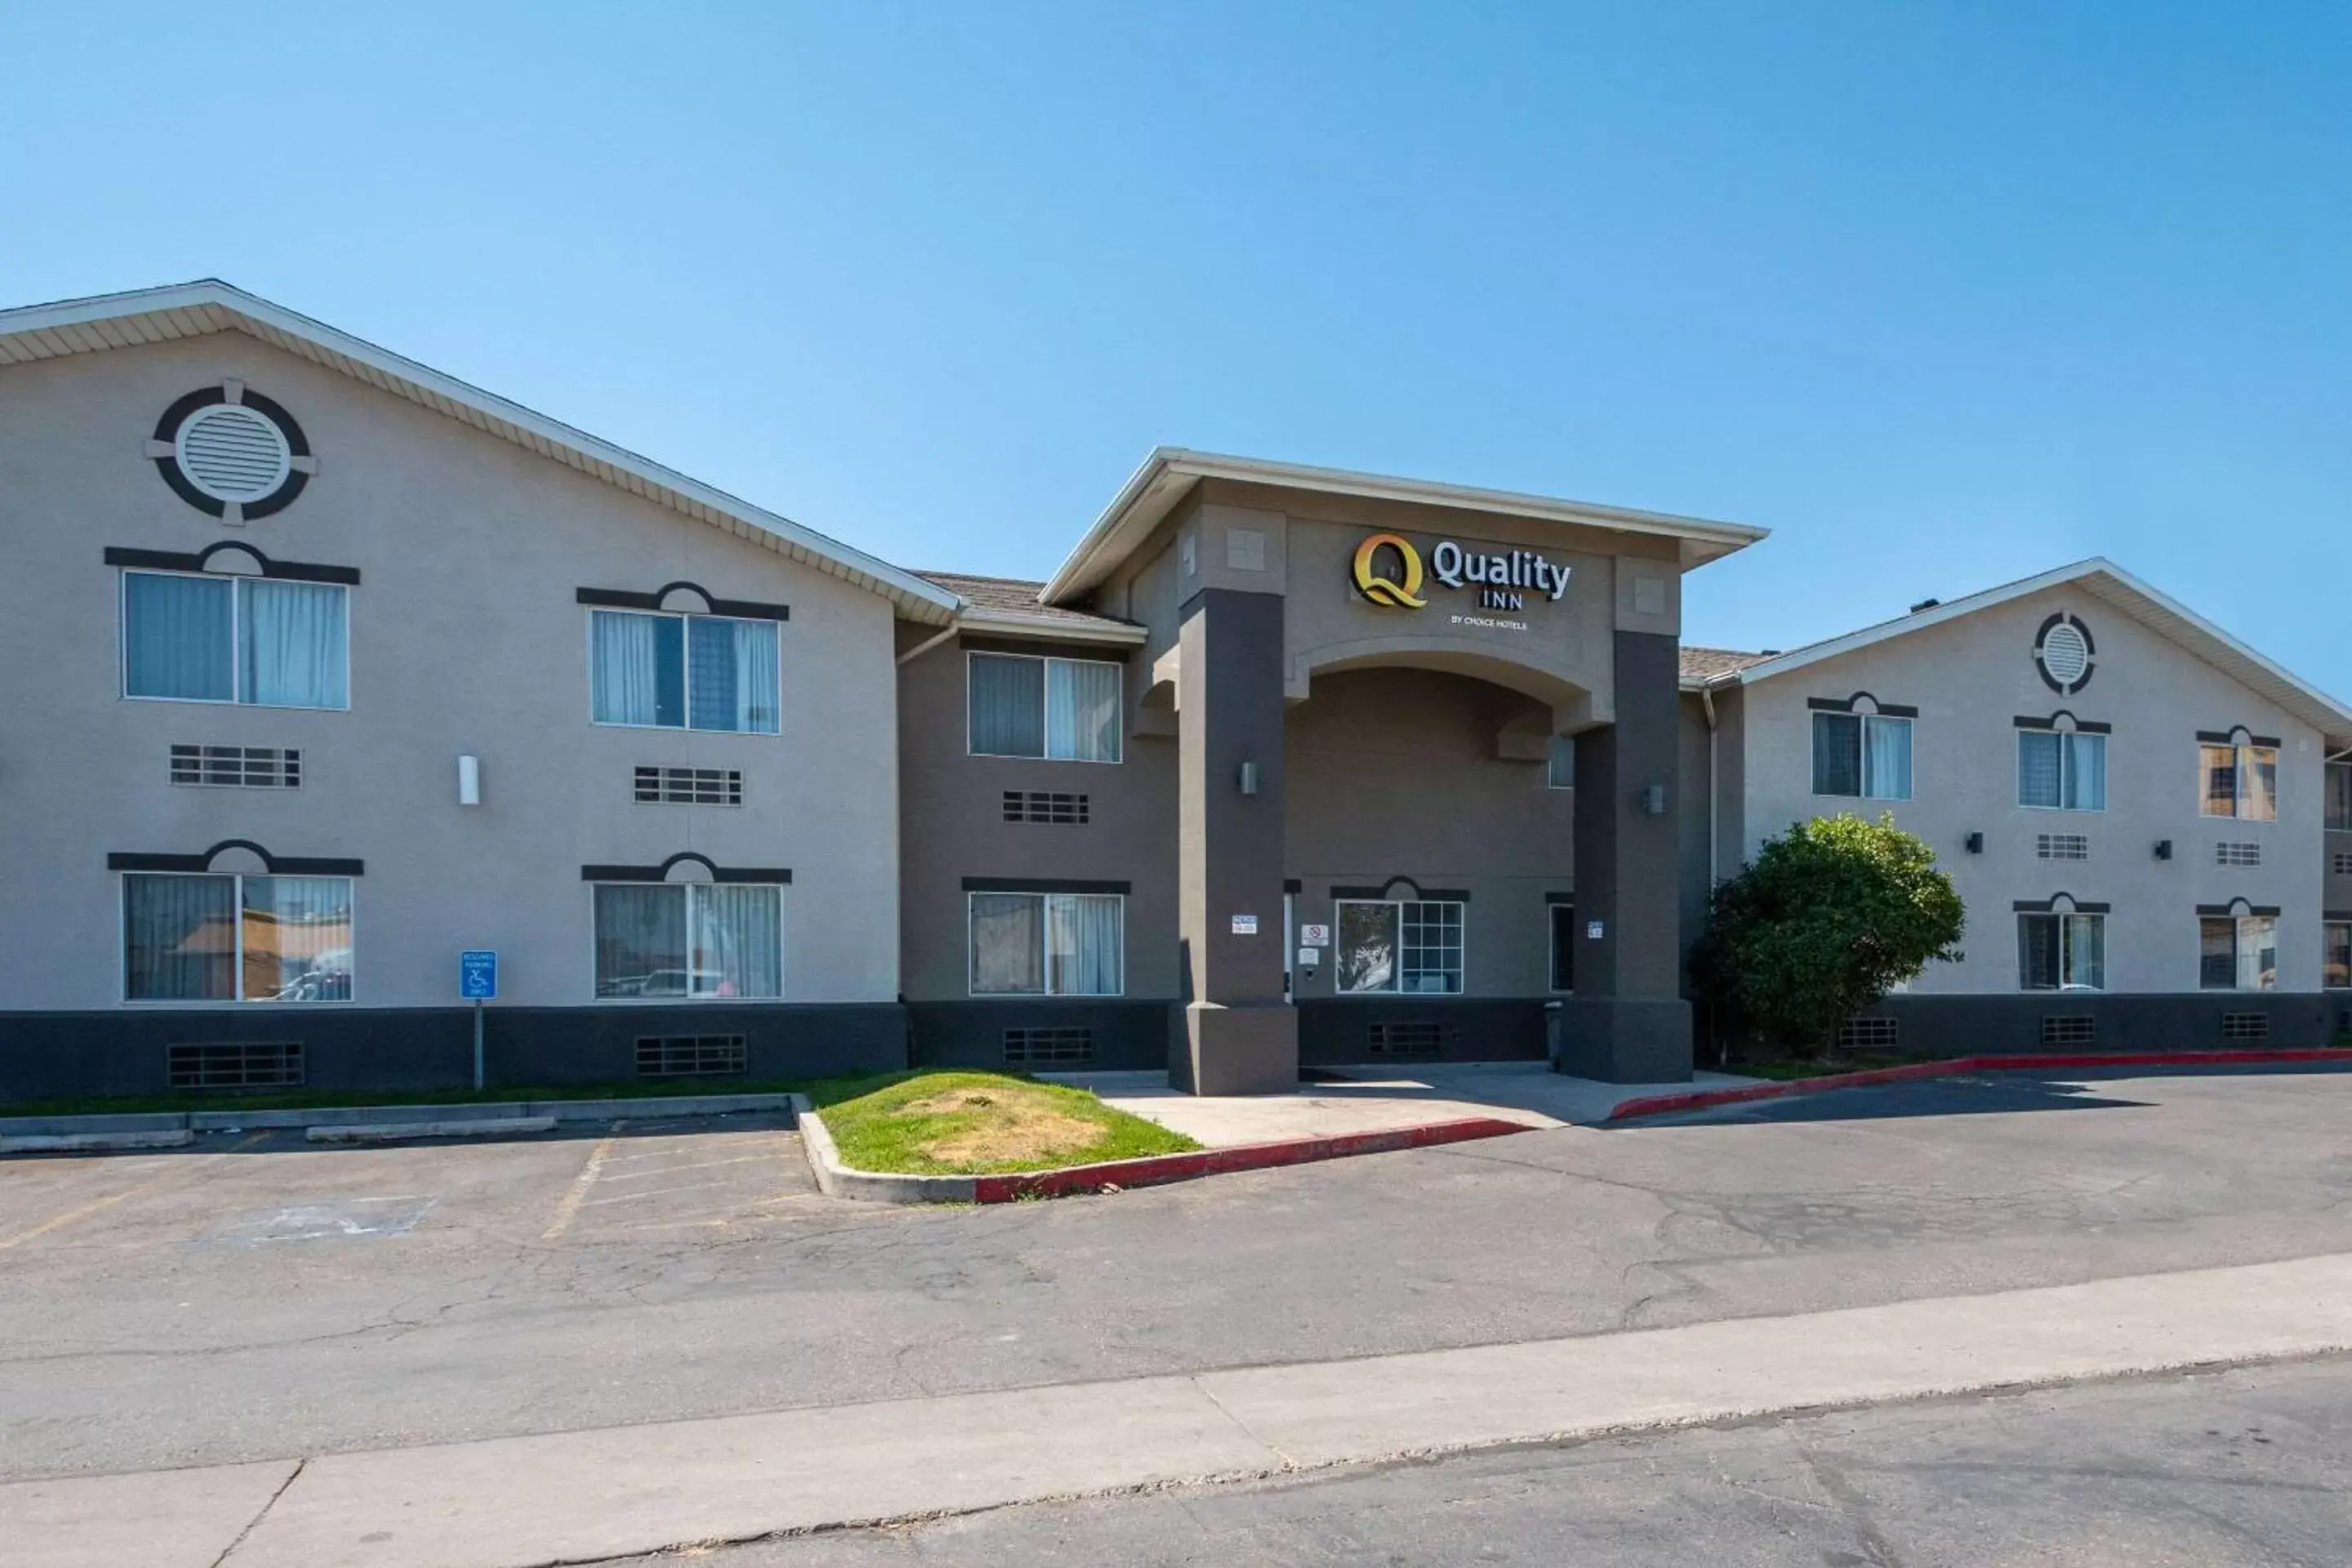 Property building in Quality Inn Midvale - Salt Lake City South